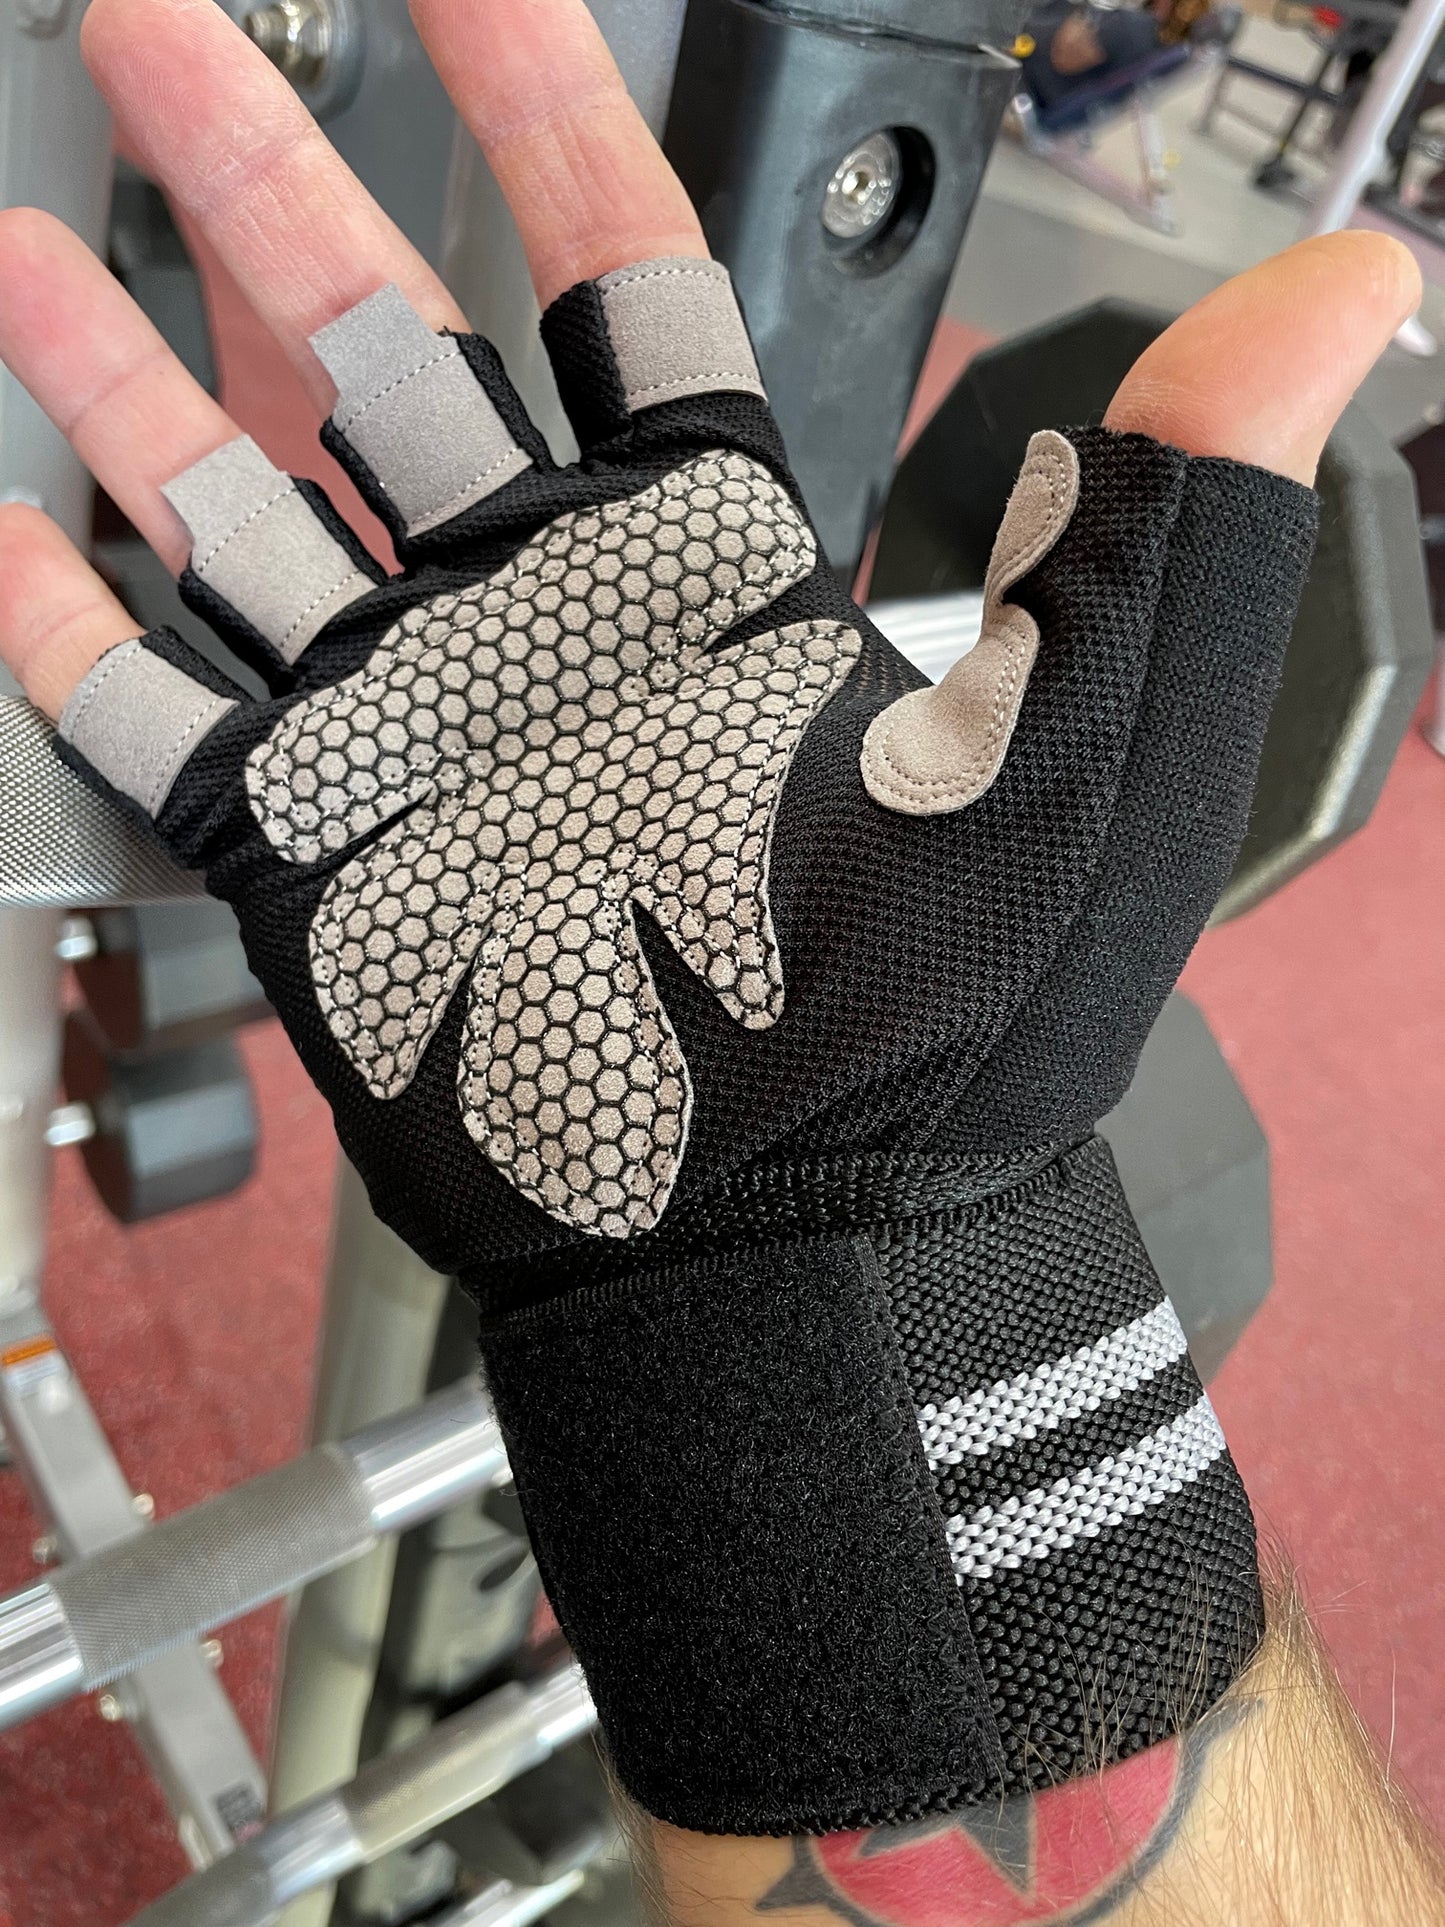 Workout Gloves for Men – Multipurpose Fingerless Gloves – Comfortable Weight Lifting Gloves – Heavy Duty Durable Materials